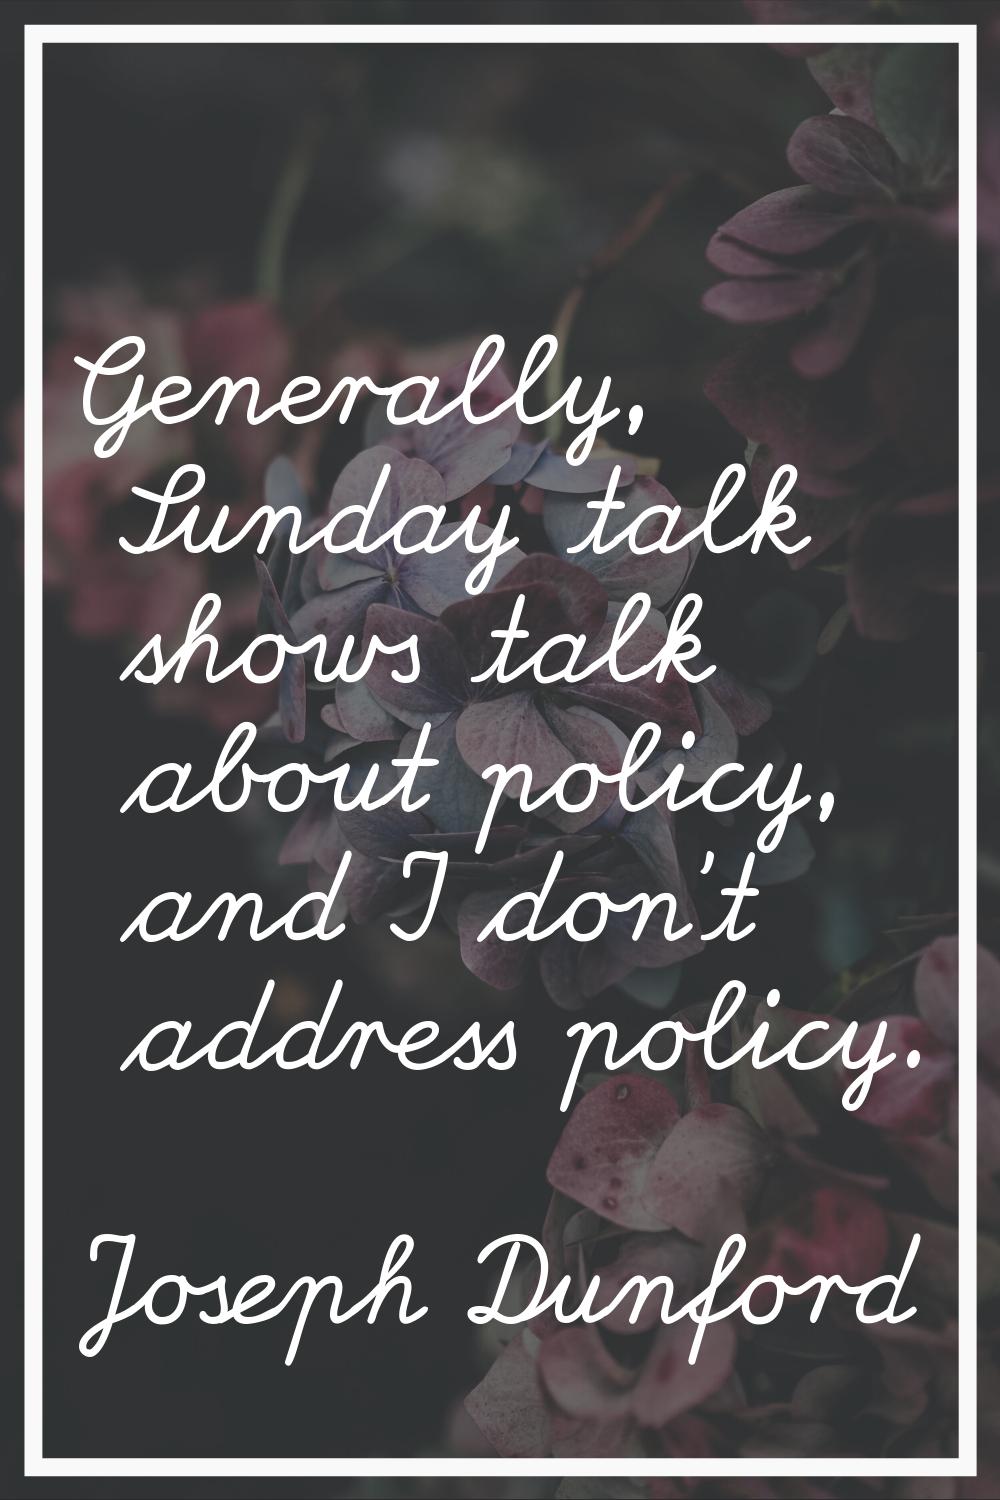 Generally, Sunday talk shows talk about policy, and I don't address policy.